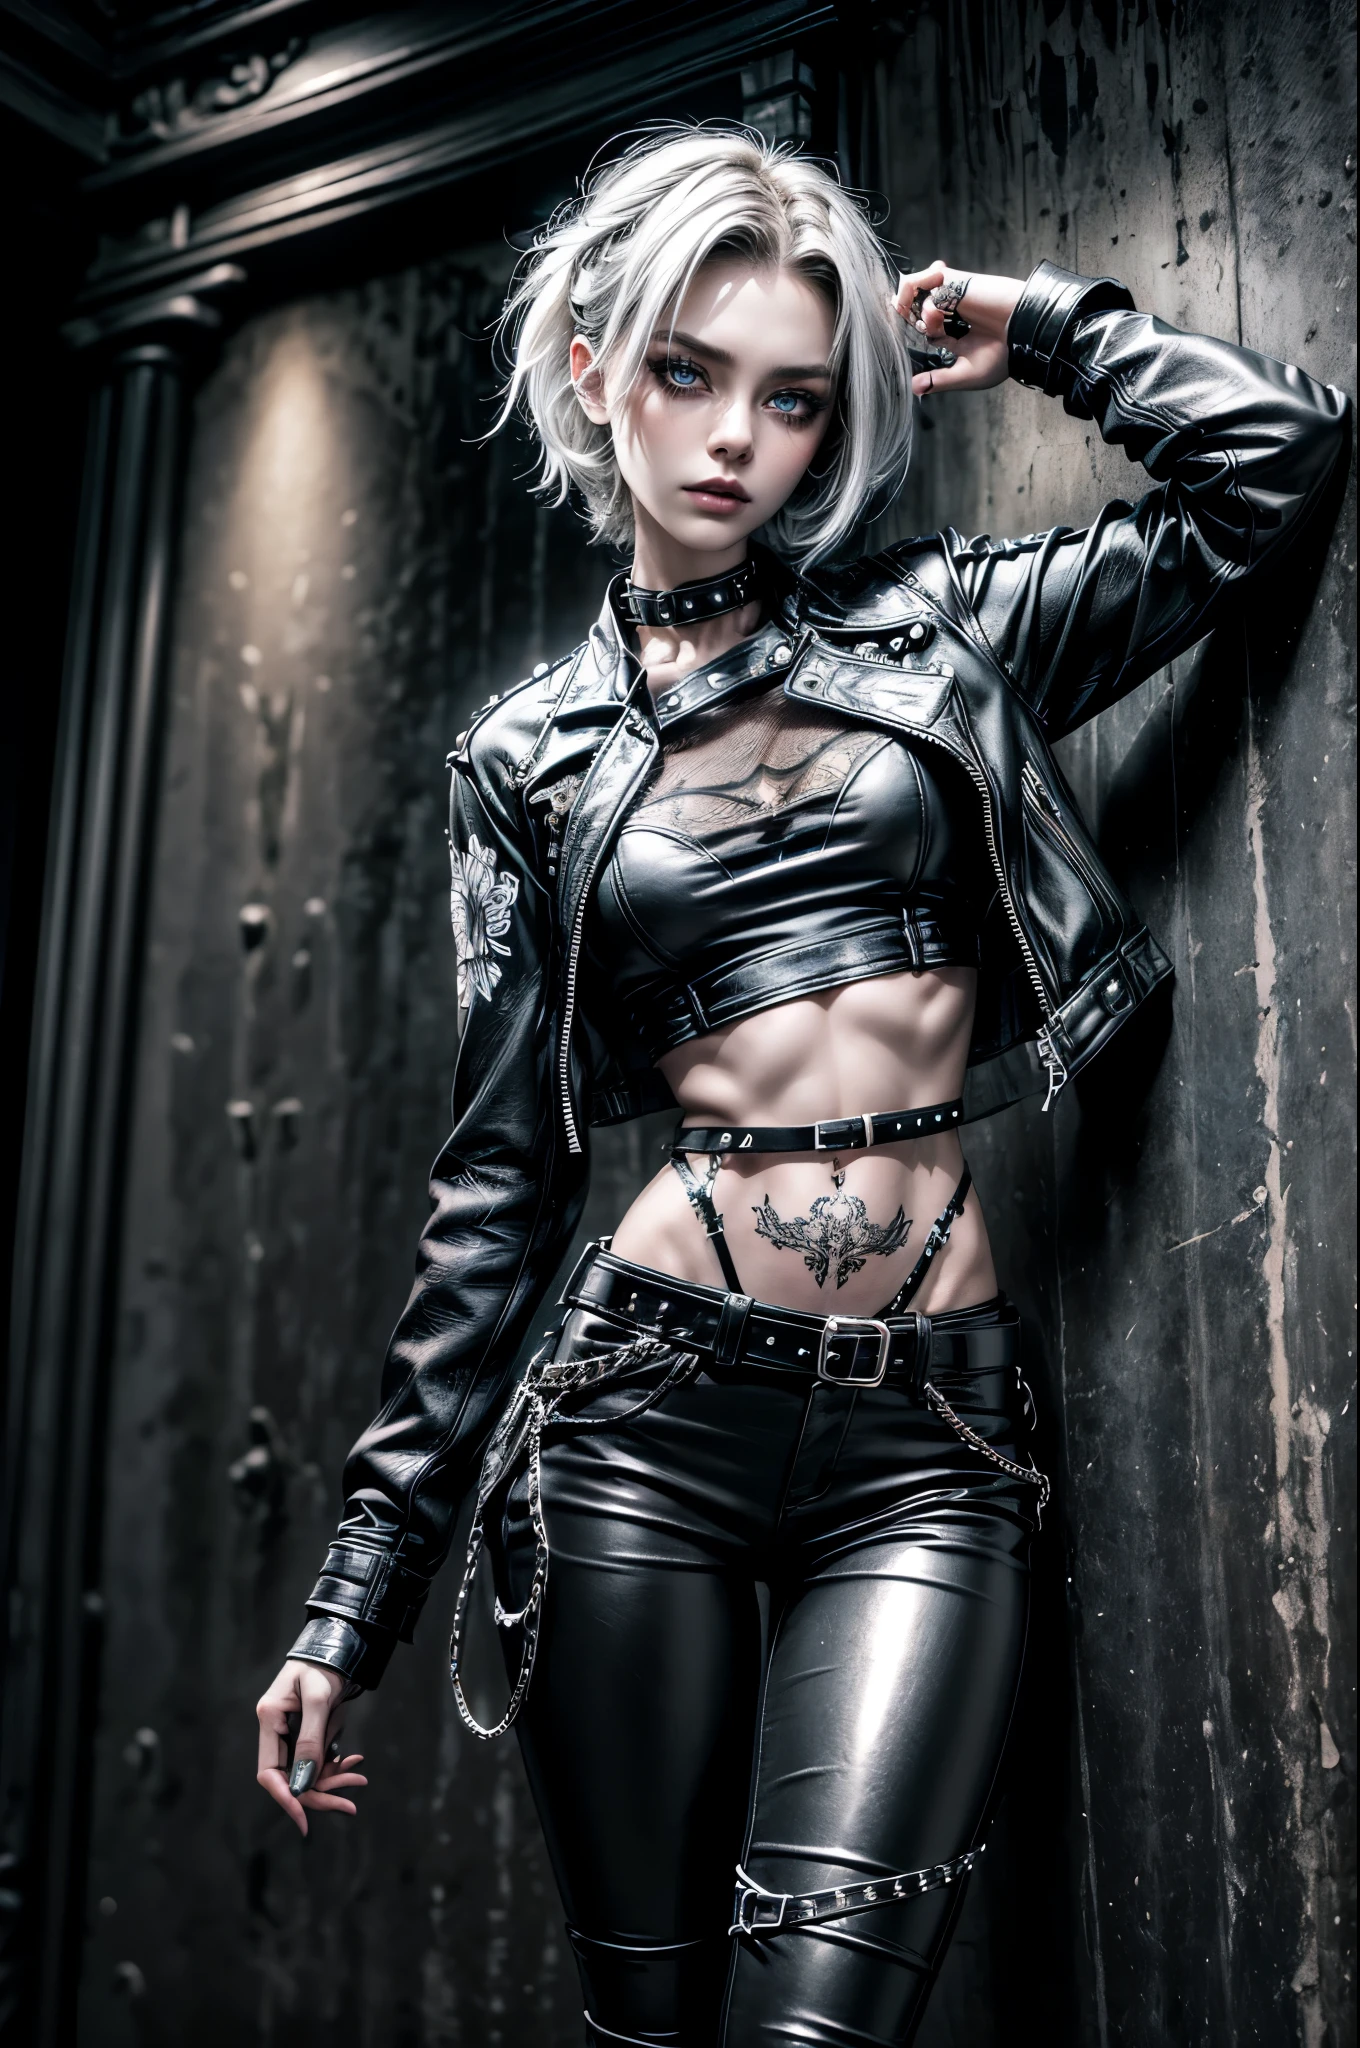 (Detailed illustrations, Very detailed and detailed drawing, Delicate lines with slow and rapid, Realistic texture expression), One woman with very short black hair , ( emo hairstyle, ), goth, pale white skin, evil smirk, (girls bedroom background), dark lighting, cold atmosphere, lore_Emma , blue eyes , dark eyeliner, (ultra dark glossy black lipstick), bored expression, gorgeous face , super cute, 18 years old , hyper detailed face, (super skinny figure , small breast, thin waist), back leaning against wall, one raised arm behind head, slim legs, slim hips, LowriseXL, (ultra low rise wet look shiny leather pants with transparent flower pattern), (mesh shirt with flower pattern), black choker, vulva tattoo, (white lotus flower in hair), ((flower pattern tattoo)), fingerless leather gloves, (black nail polish), faded tattoo's, ((thigh belt)), ((hip chains)), ((belt hanging on hip)), ((many studded belts)), ((black leather jacket with white fur trim))